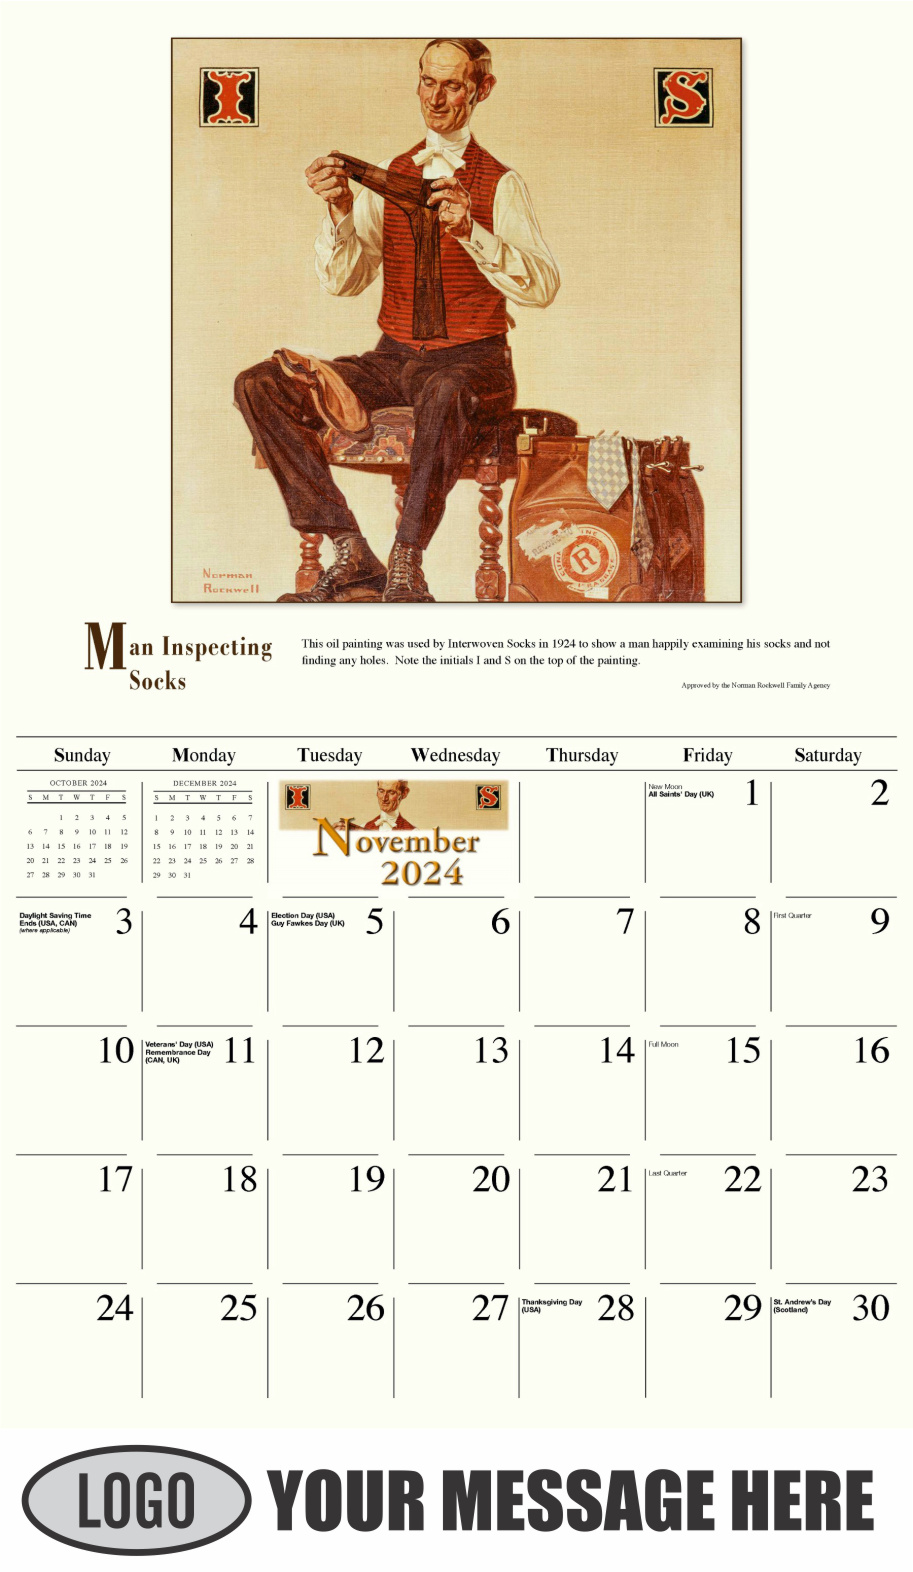 Memorable Images by Norman Rockwell 2024 Business Promotional Wall Calendar - November